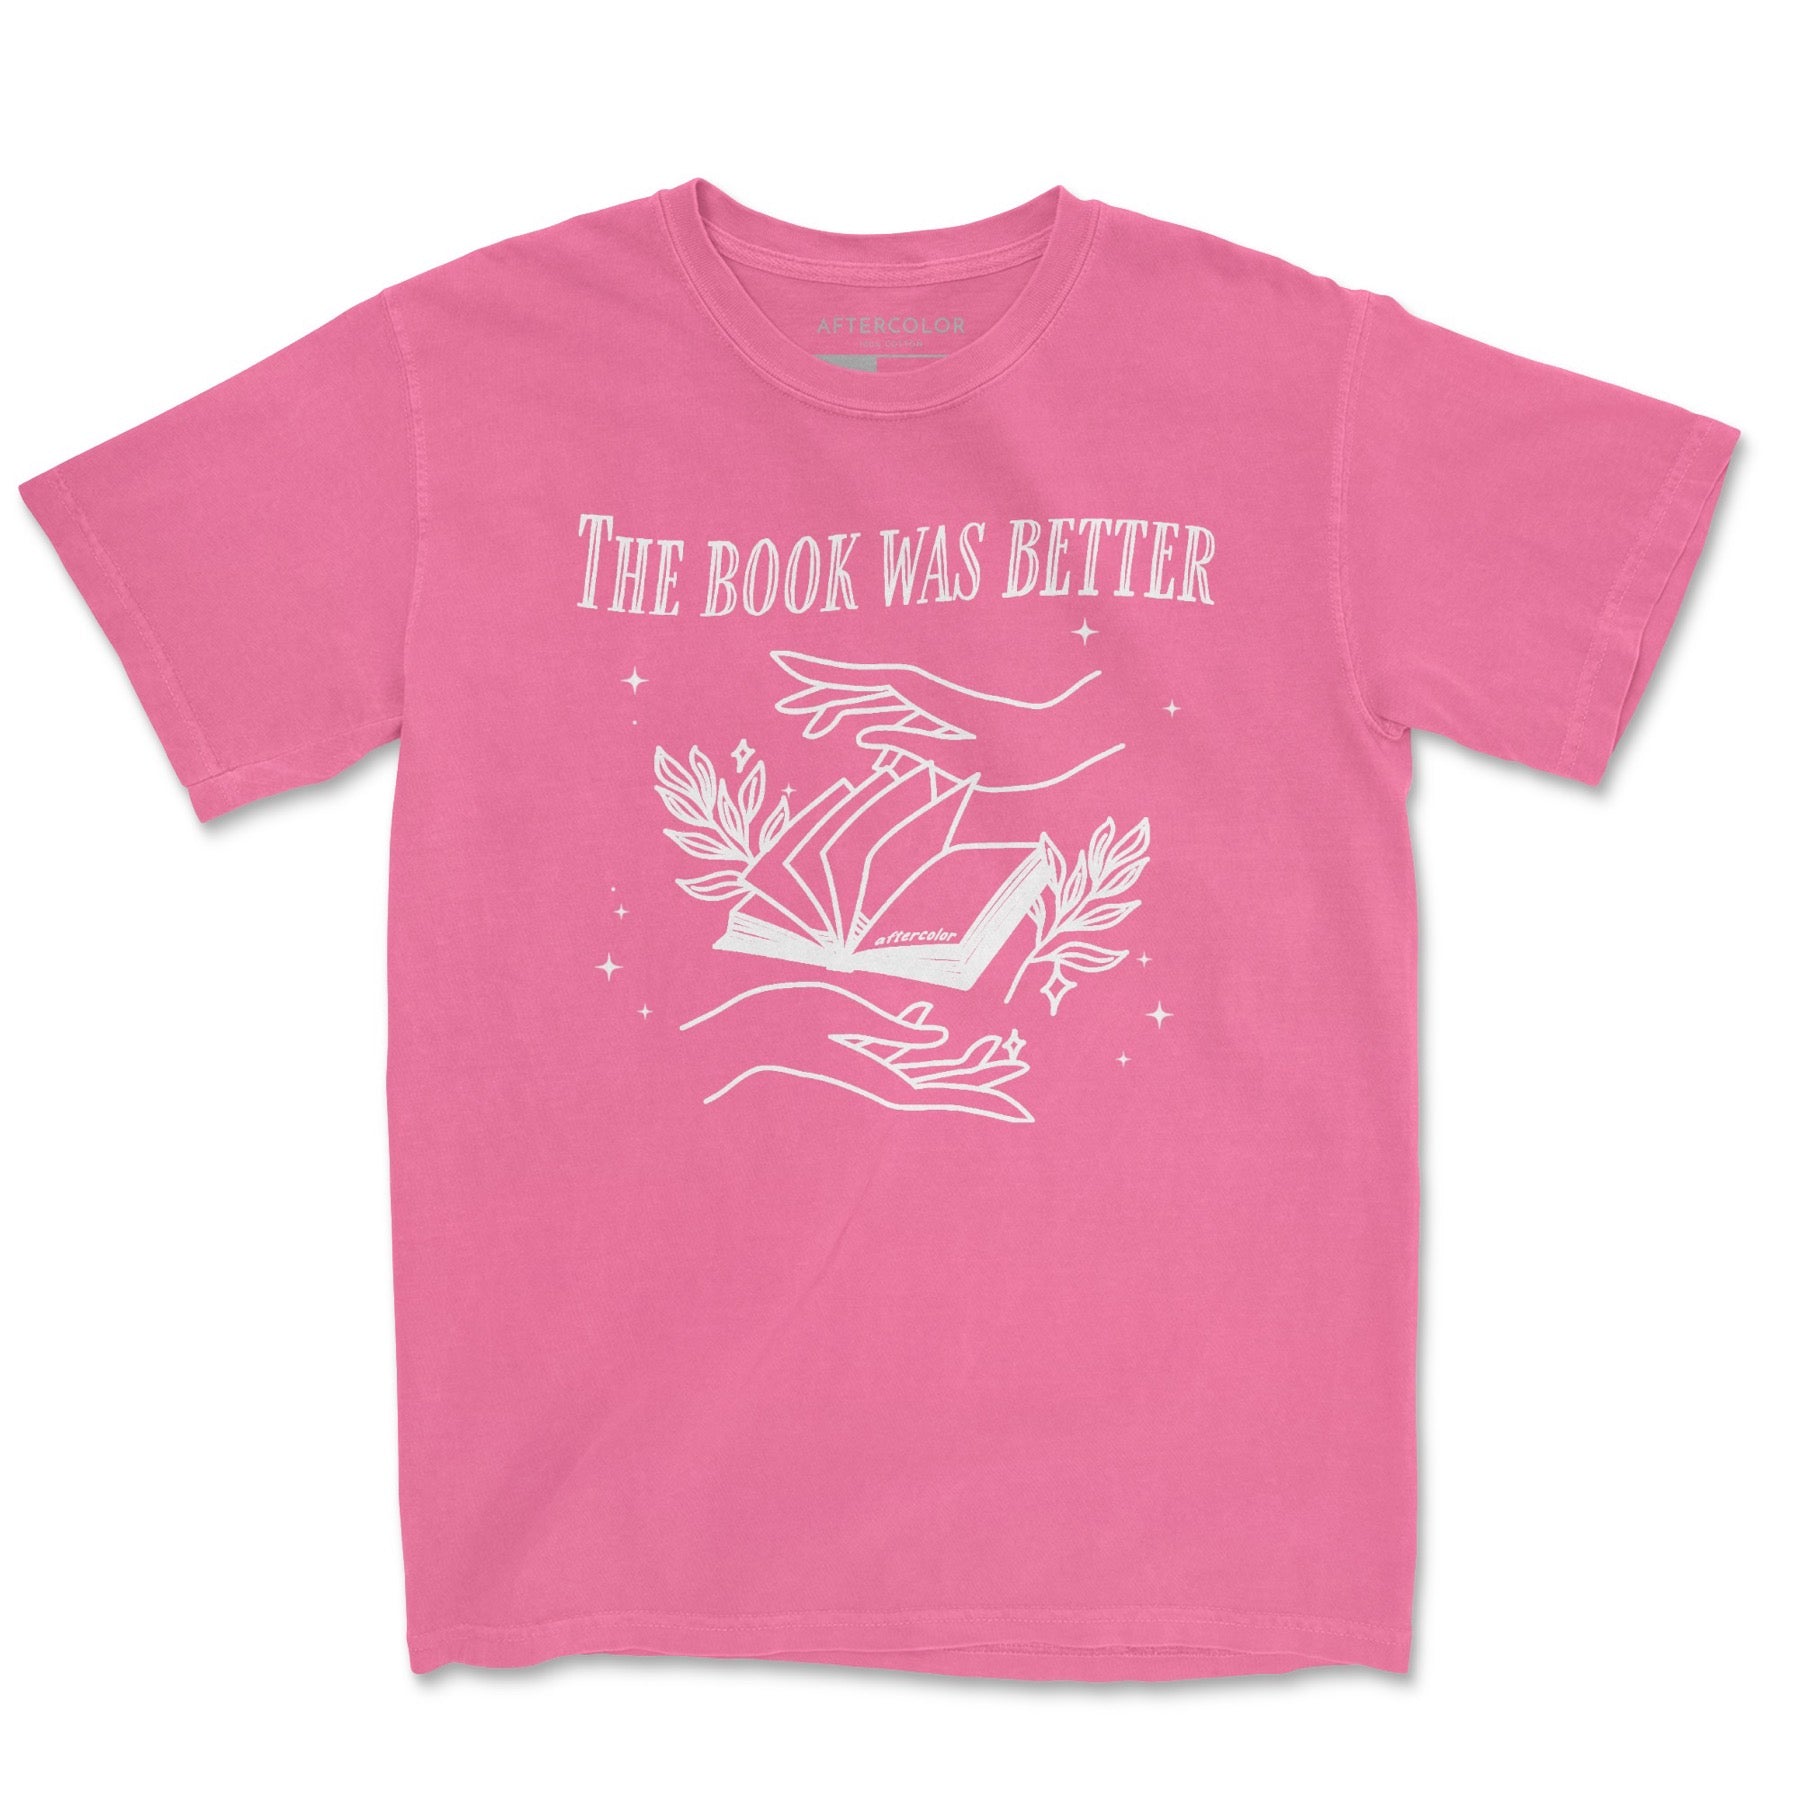 The Book Was Better Garment Dyed Tee Pink Edition